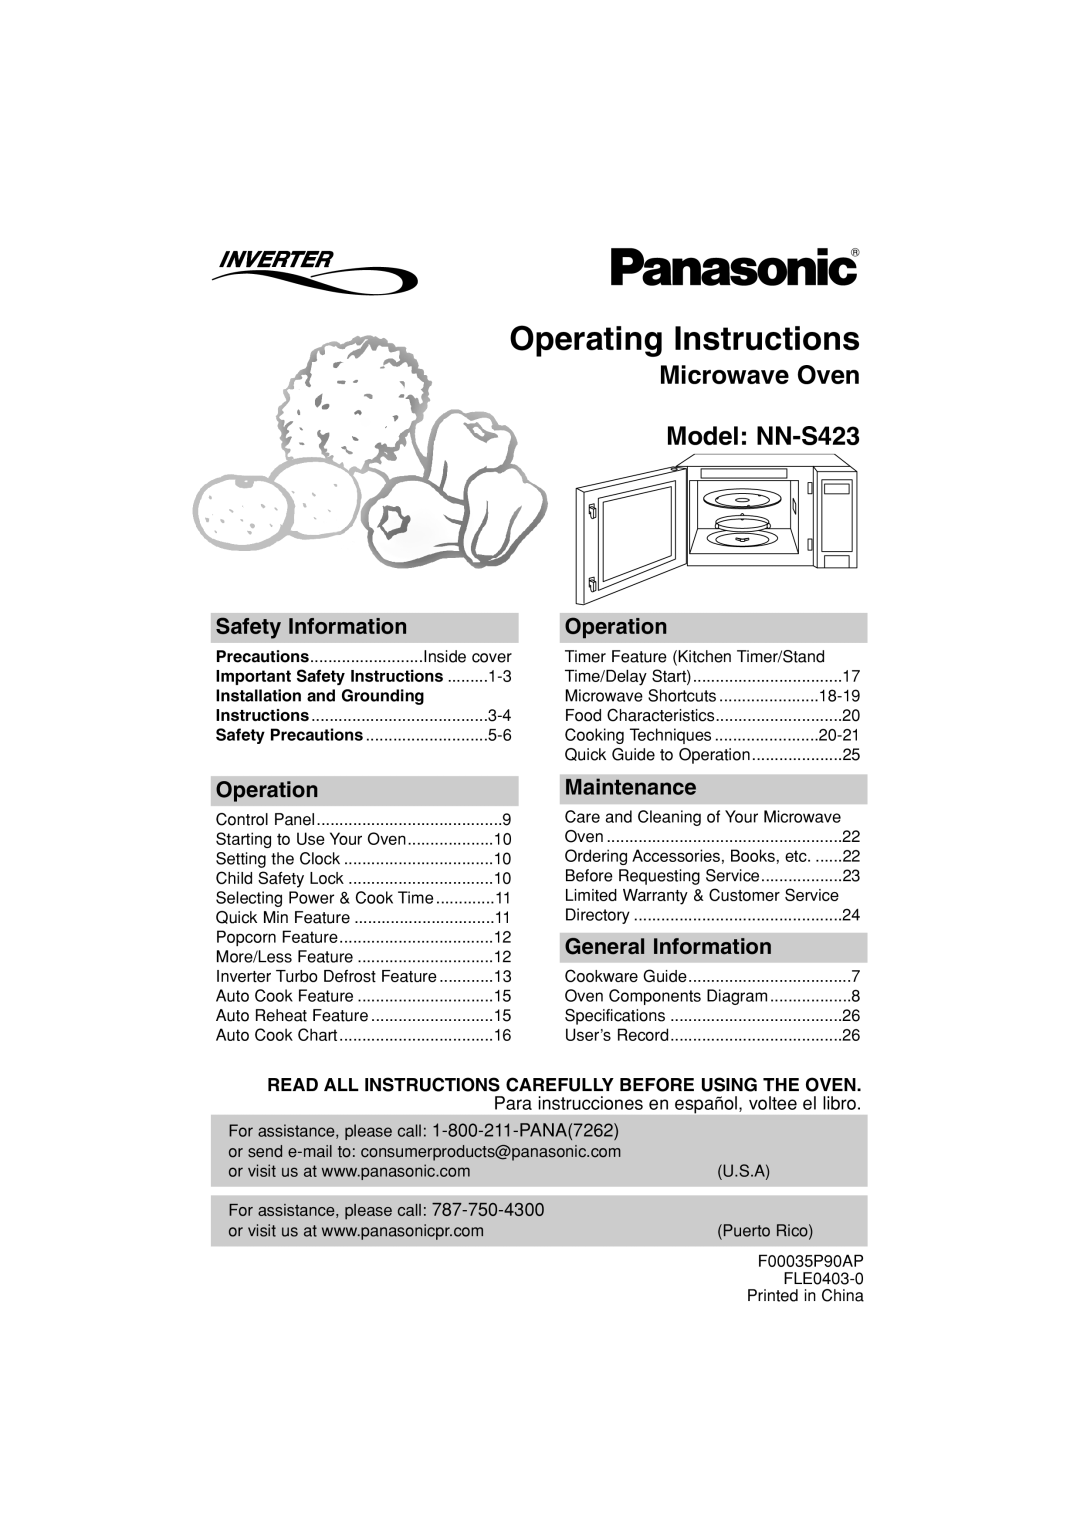 Panasonic important safety instructions Operating Instructions, Microwave Oven Model NN-S423, Safety Information 